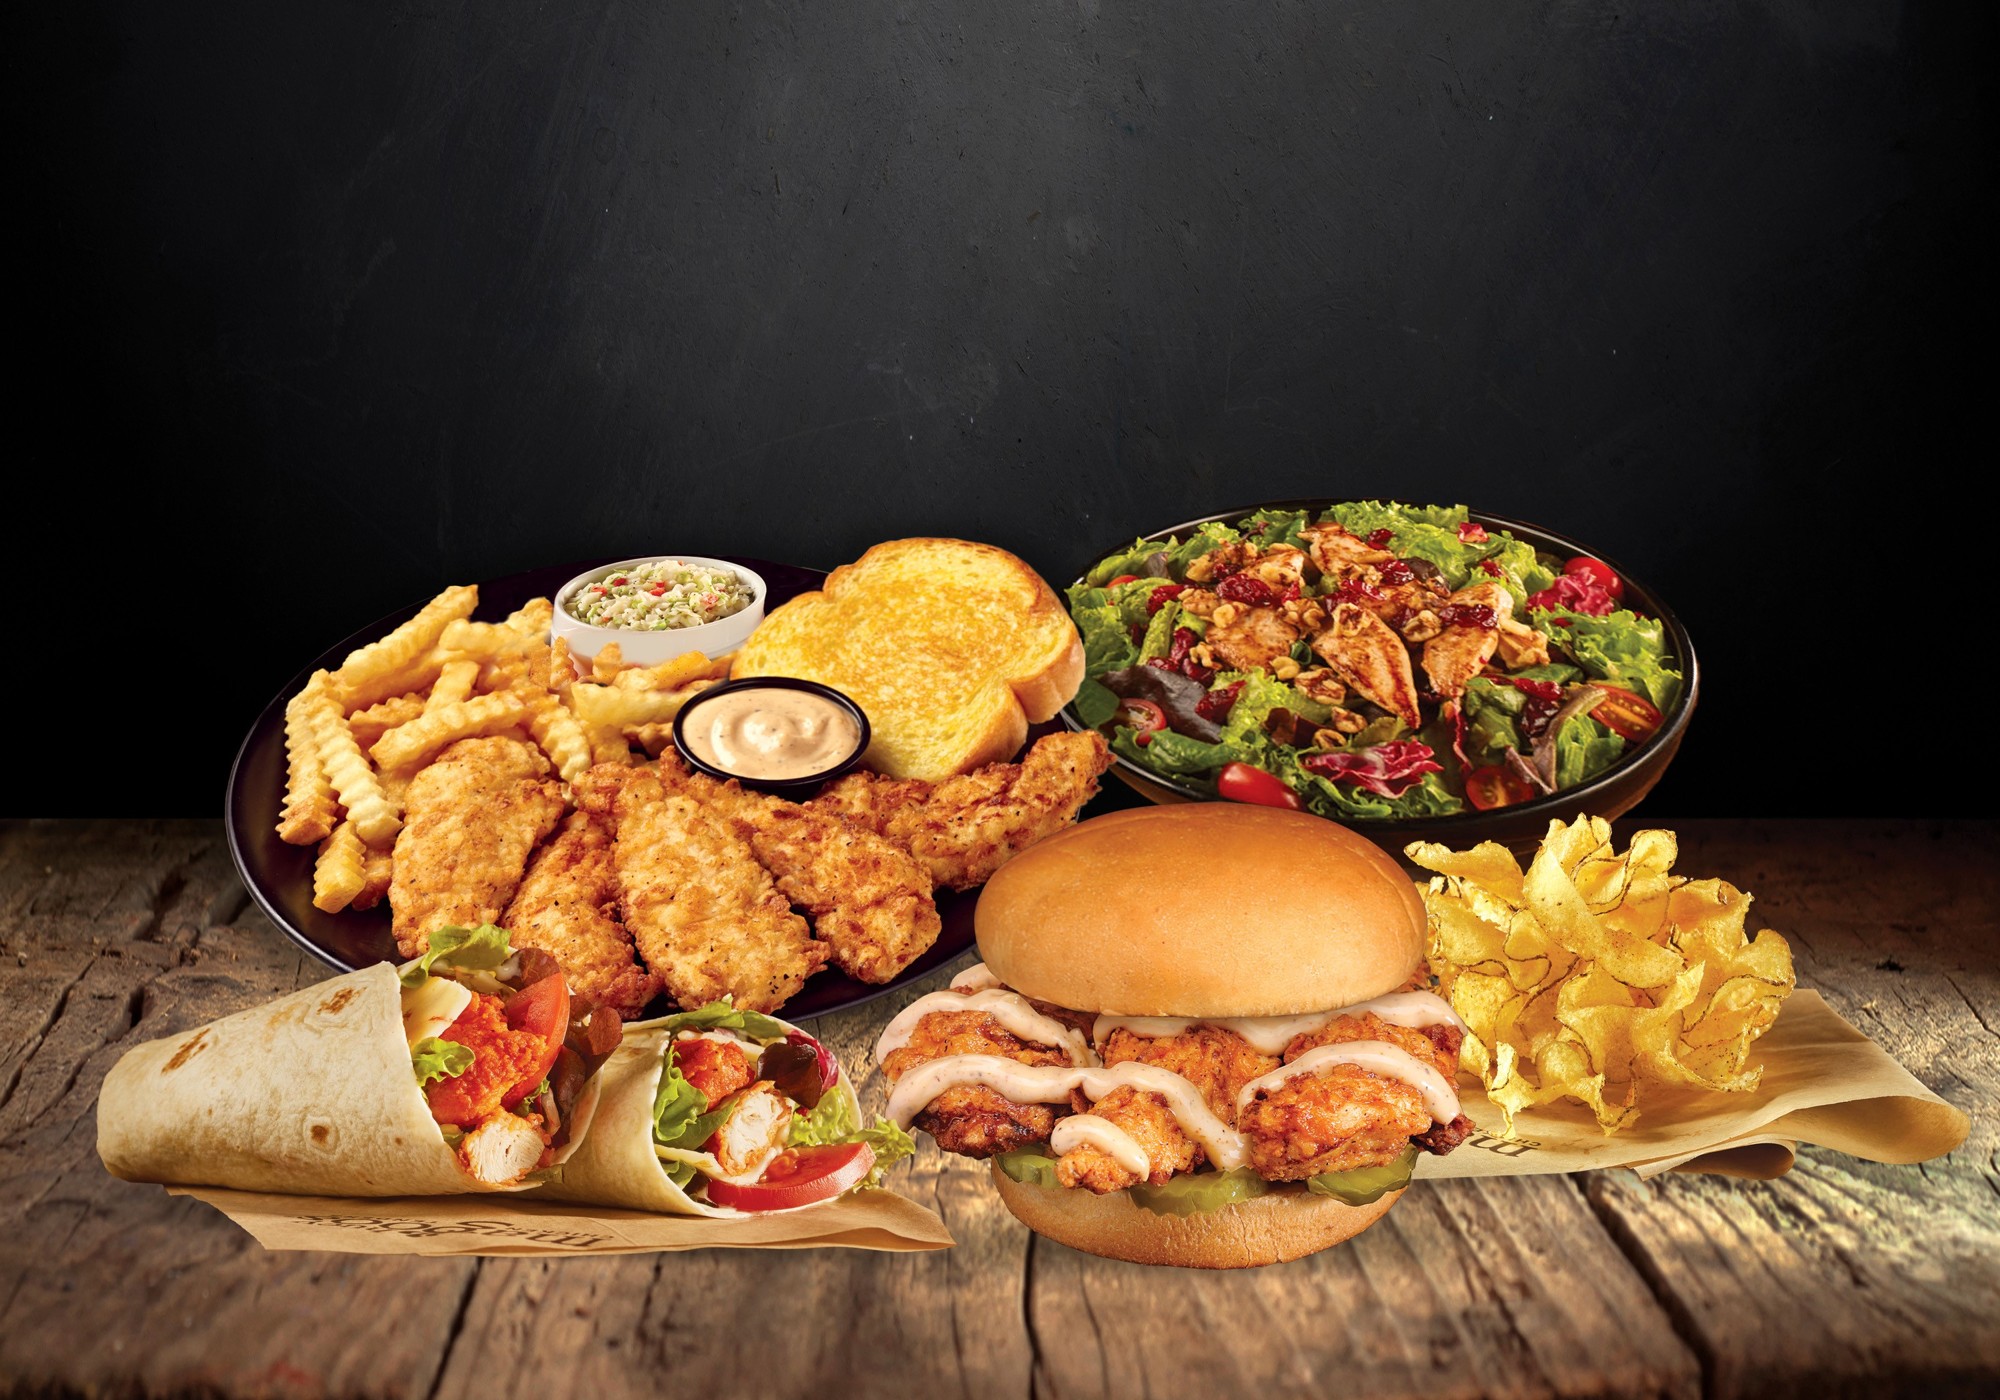 Huey Magoo’s serves grilled, hand-breaded or “sauced” premium chicken tenders, salads, sandwiches and wraps.